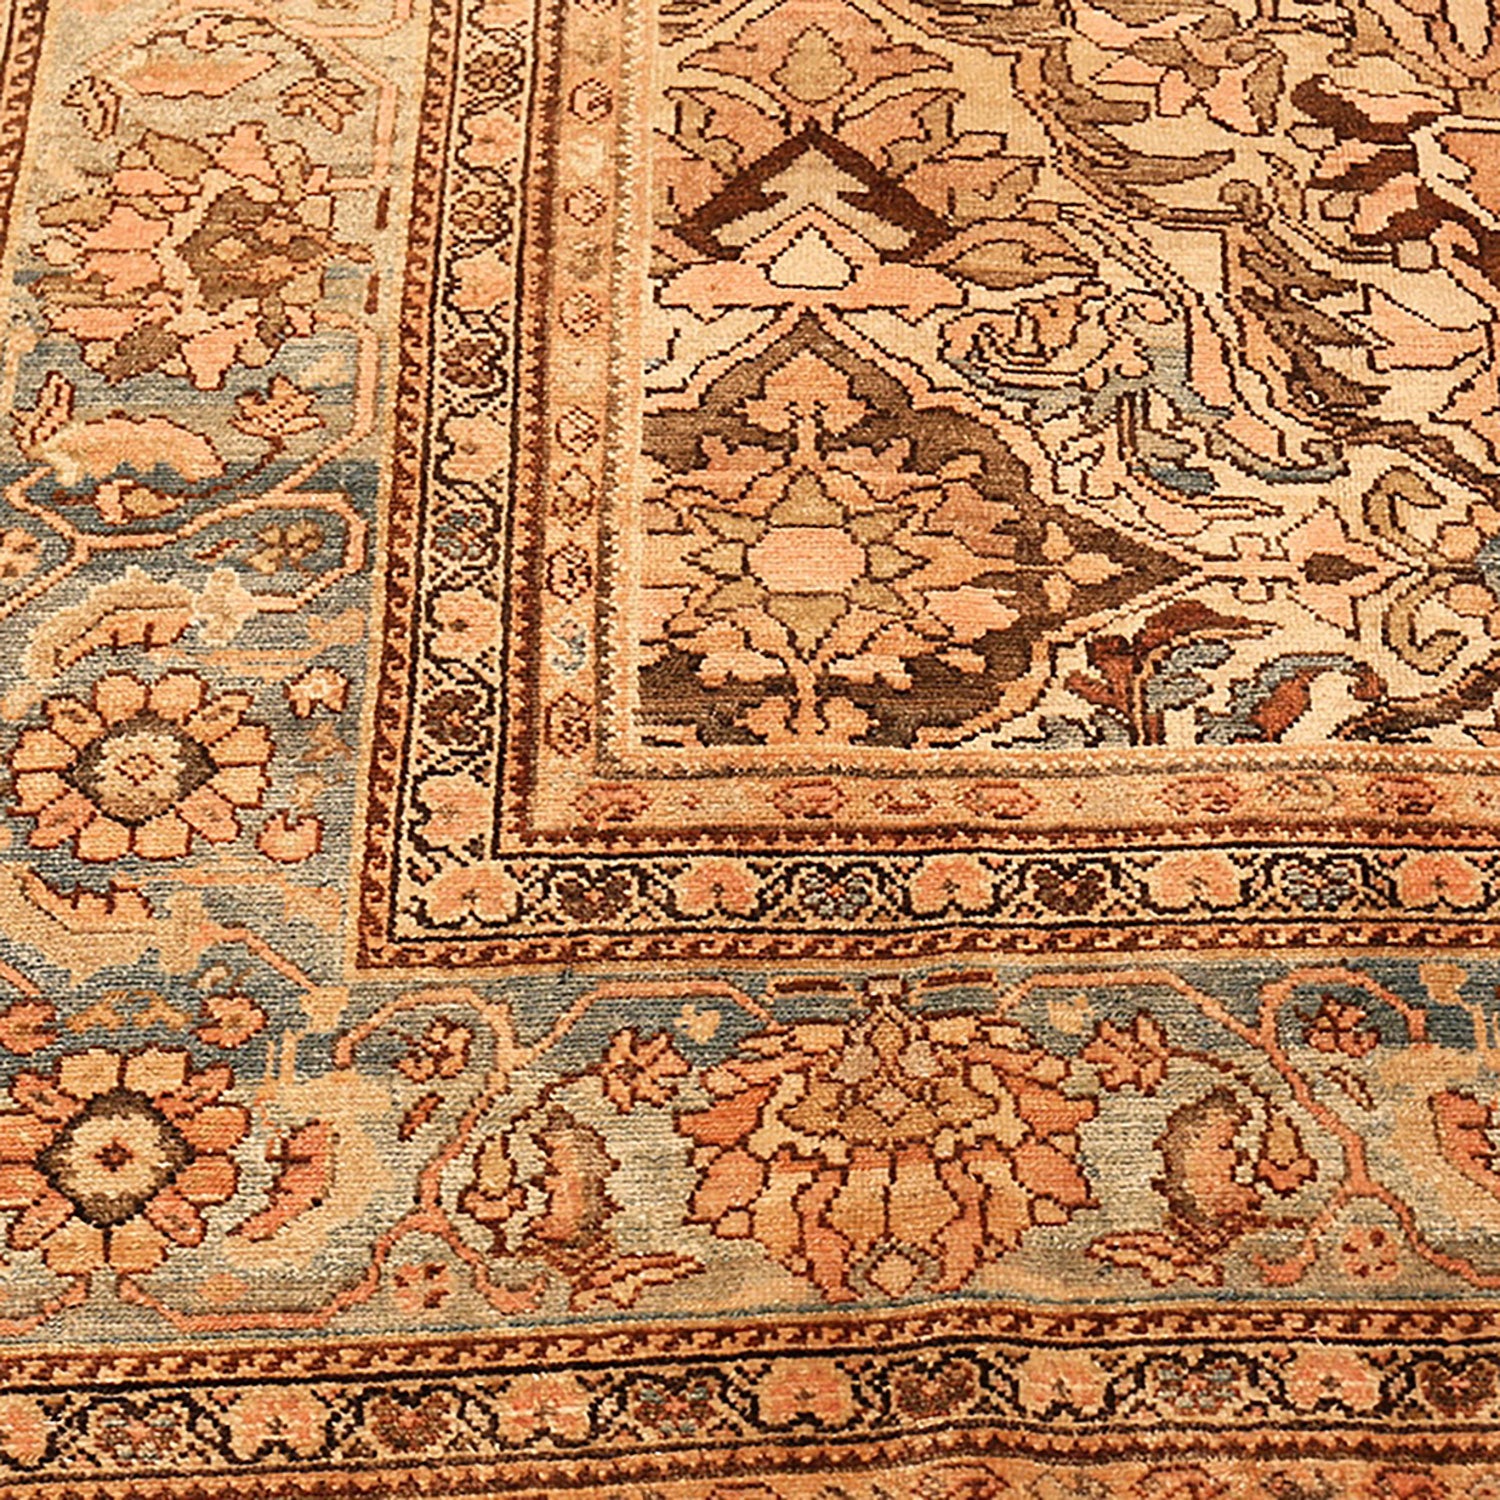 Exquisite handwoven rug showcases intricate floral motifs in rich colors.